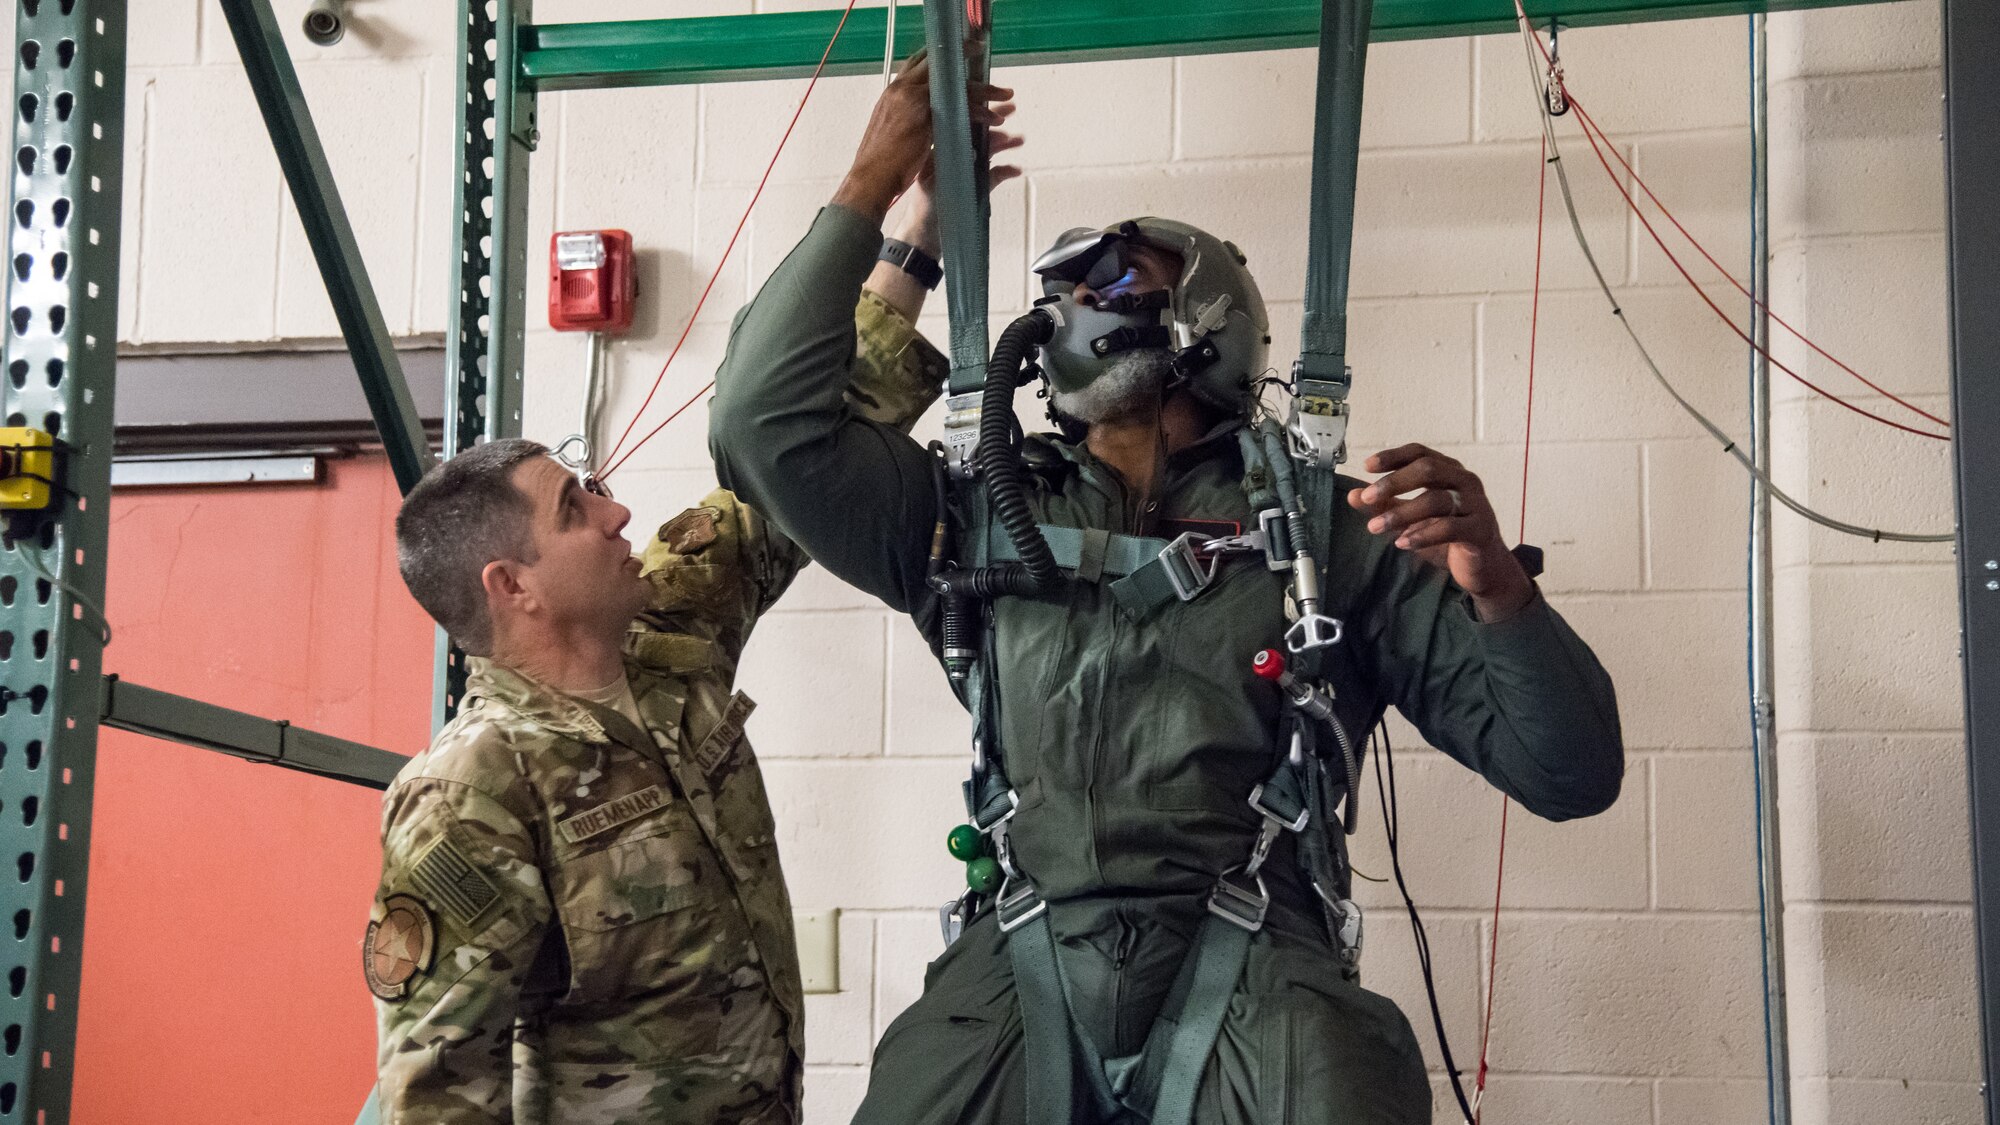 Karl Malone (right), NBA Hall of Famer, uses a parachute simulator while receiving training from Master Sgt. Martin Ruemenapp Jr. (left), 2nd Operation Support Squadron survival, evasion, resistance and escape flight chief at Barksdale Air Force Base, La., Feb. 4, 2020. Malone received training from the 96th Bomb Squadron and the 2nd Operations Support Squadron in the case of an emergency. (U.S. Air Force photo by Airman 1st Class Jacob B. Wrightsman)